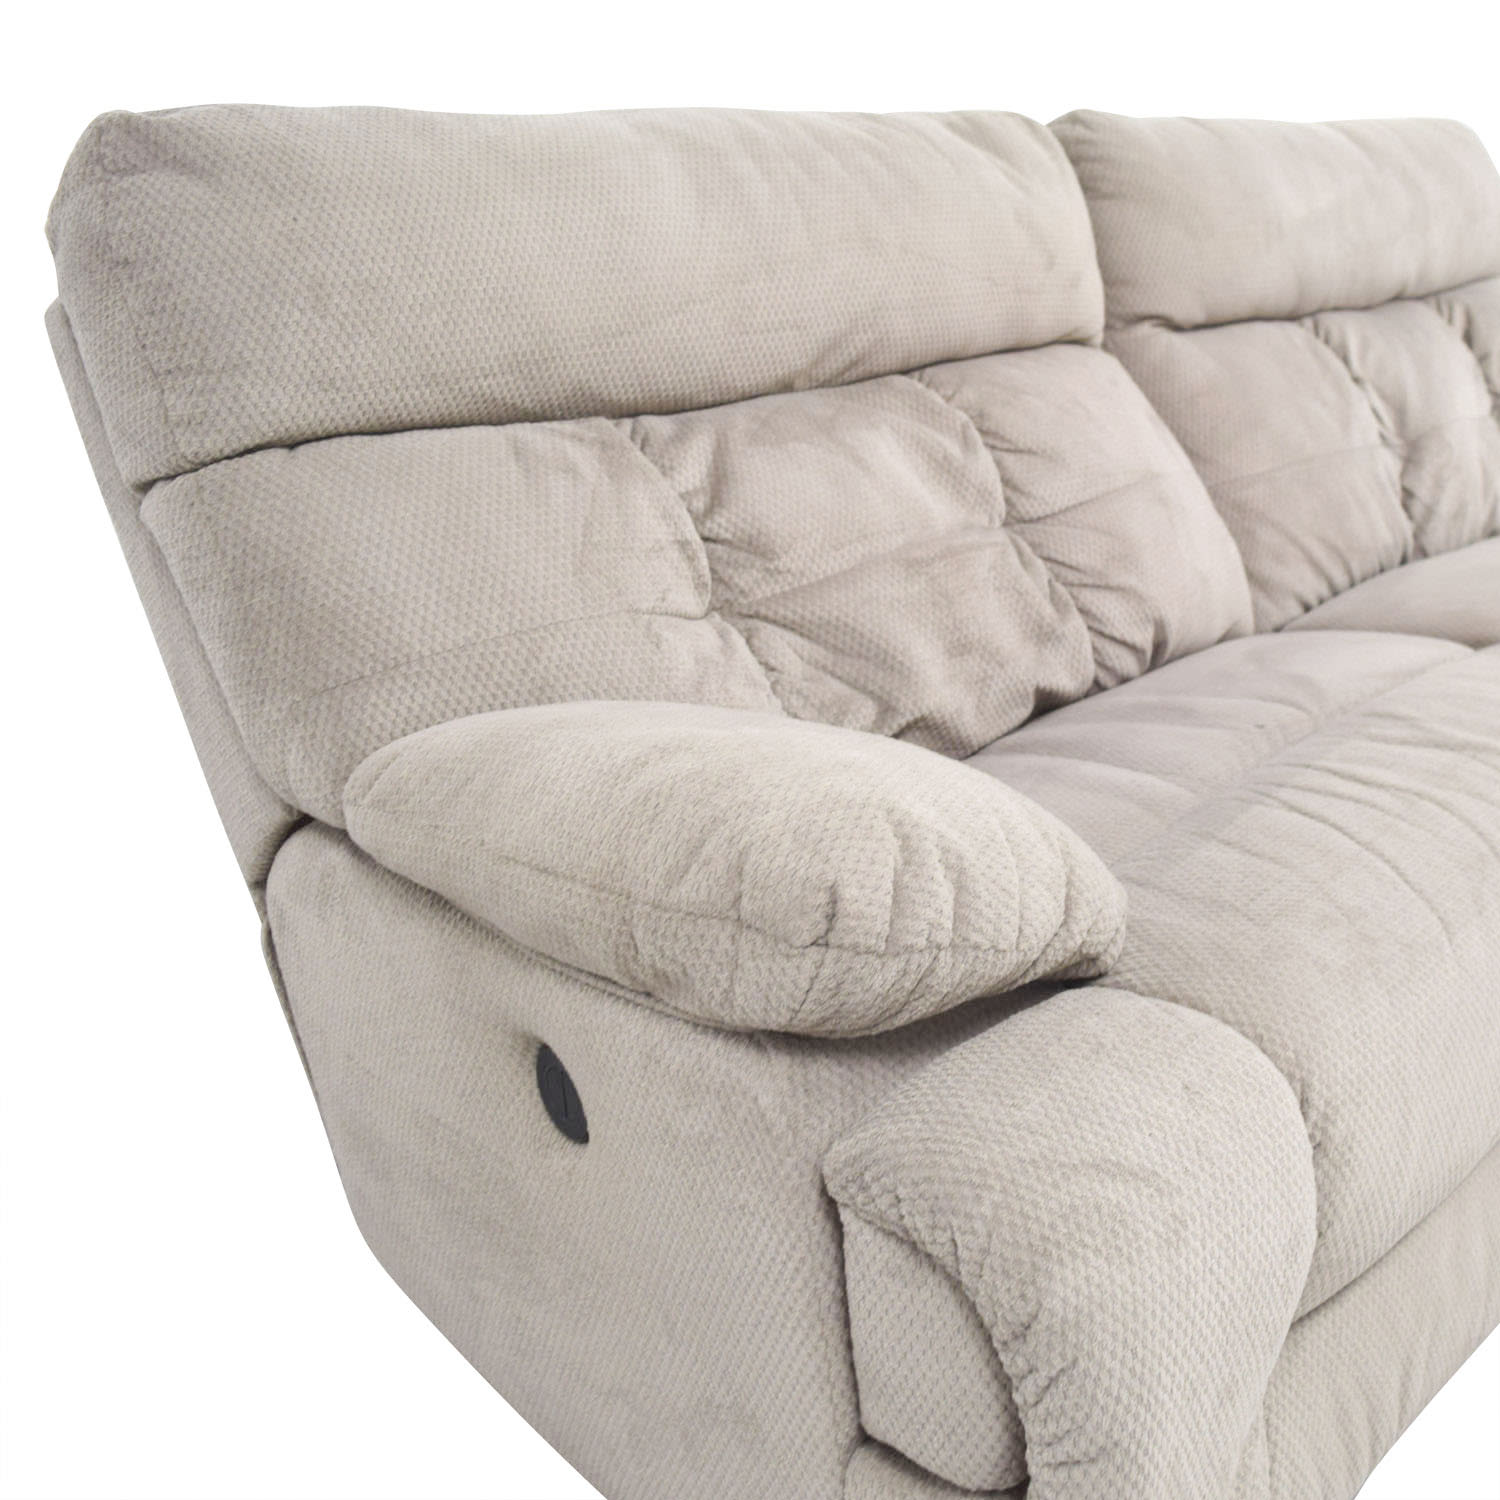 https://res.cloudinary.com/dkqtxtobb/image/upload/f_auto,q_auto:best,w_1500/product-assets/32787/ashley-furniture/chairs/recliners/second-hand-ashley-furniture-beige-reclining-sofa.jpeg